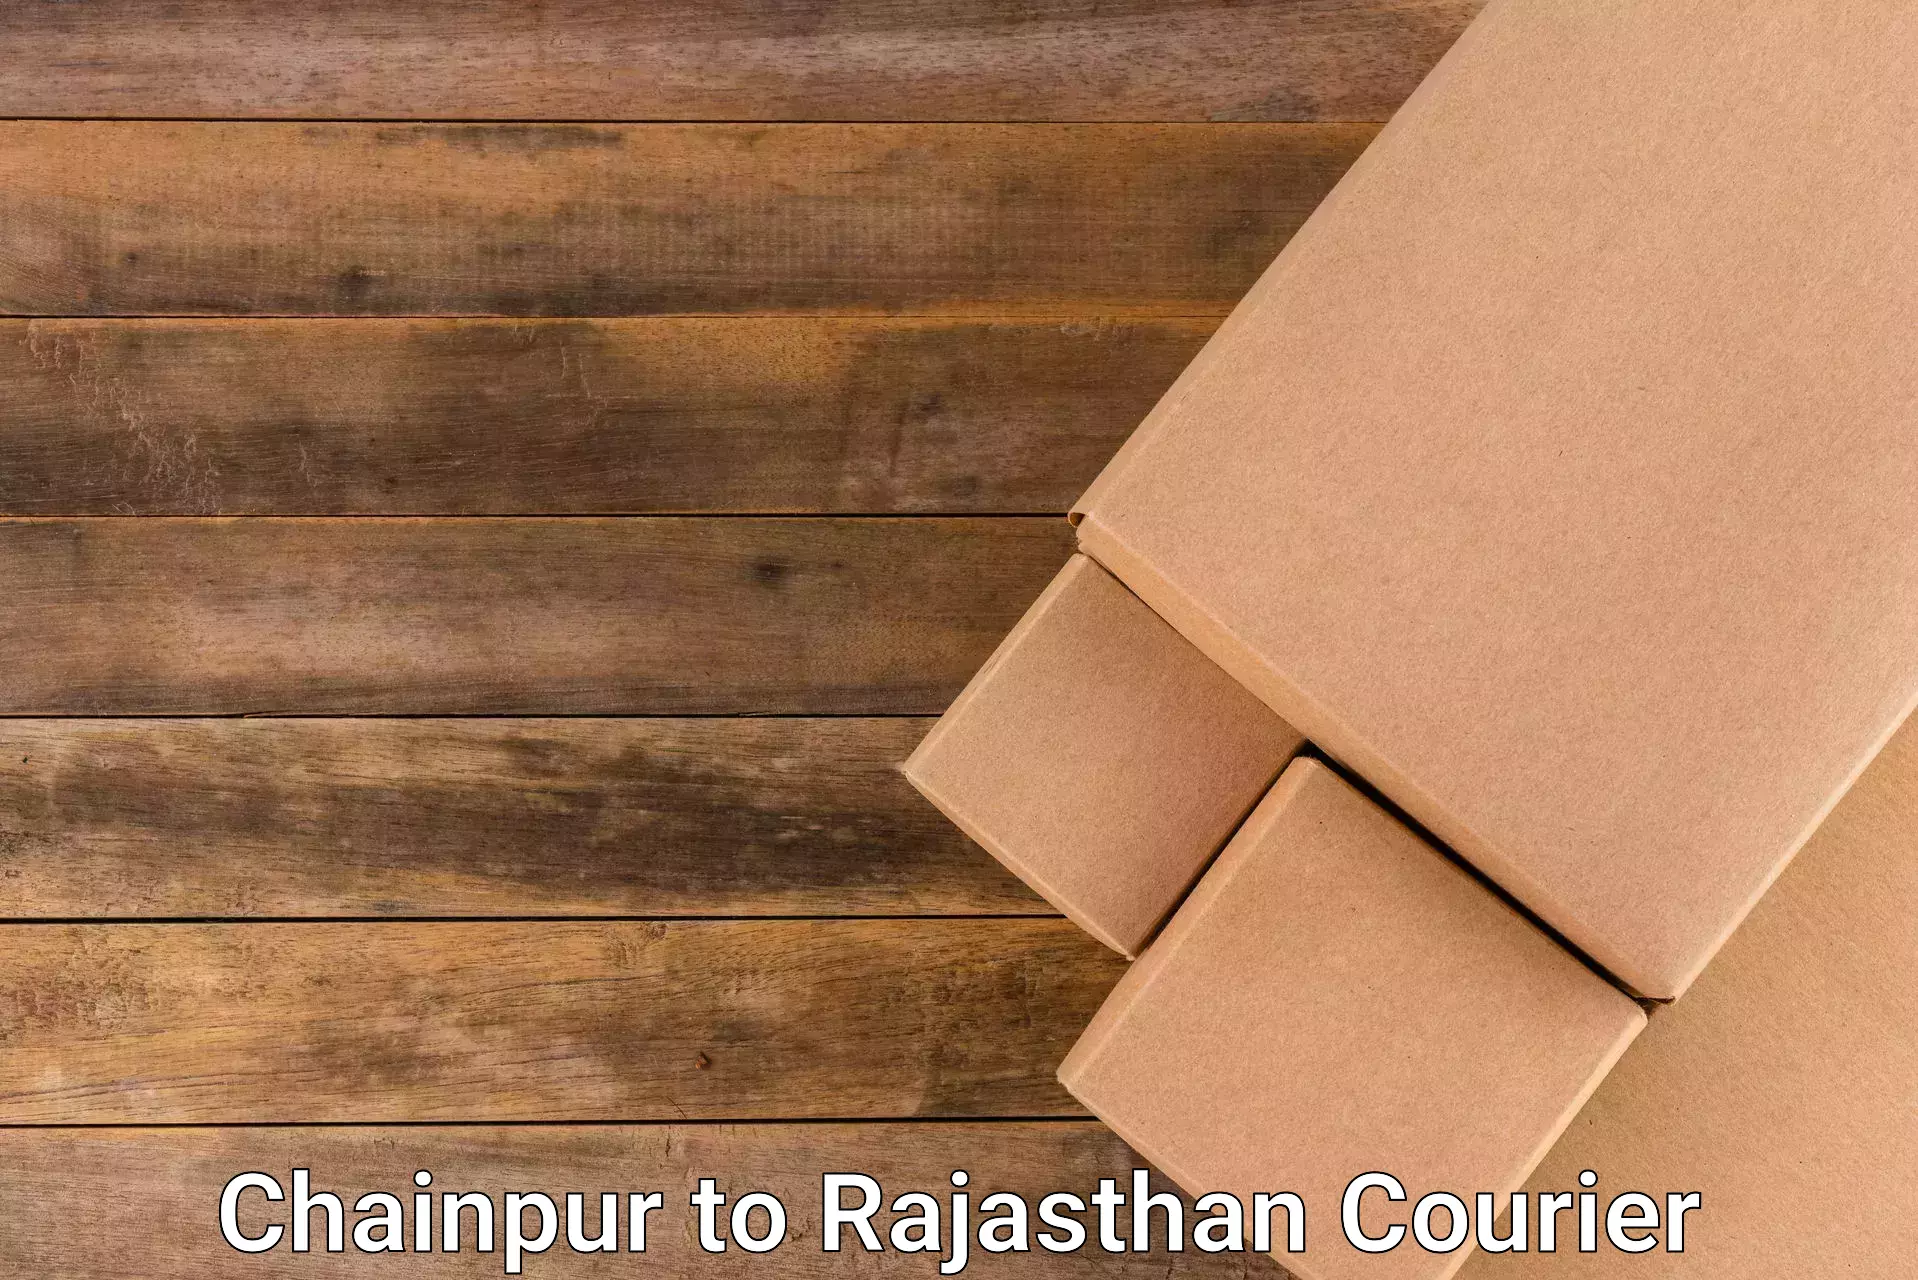 Easy return solutions Chainpur to Rajasthan